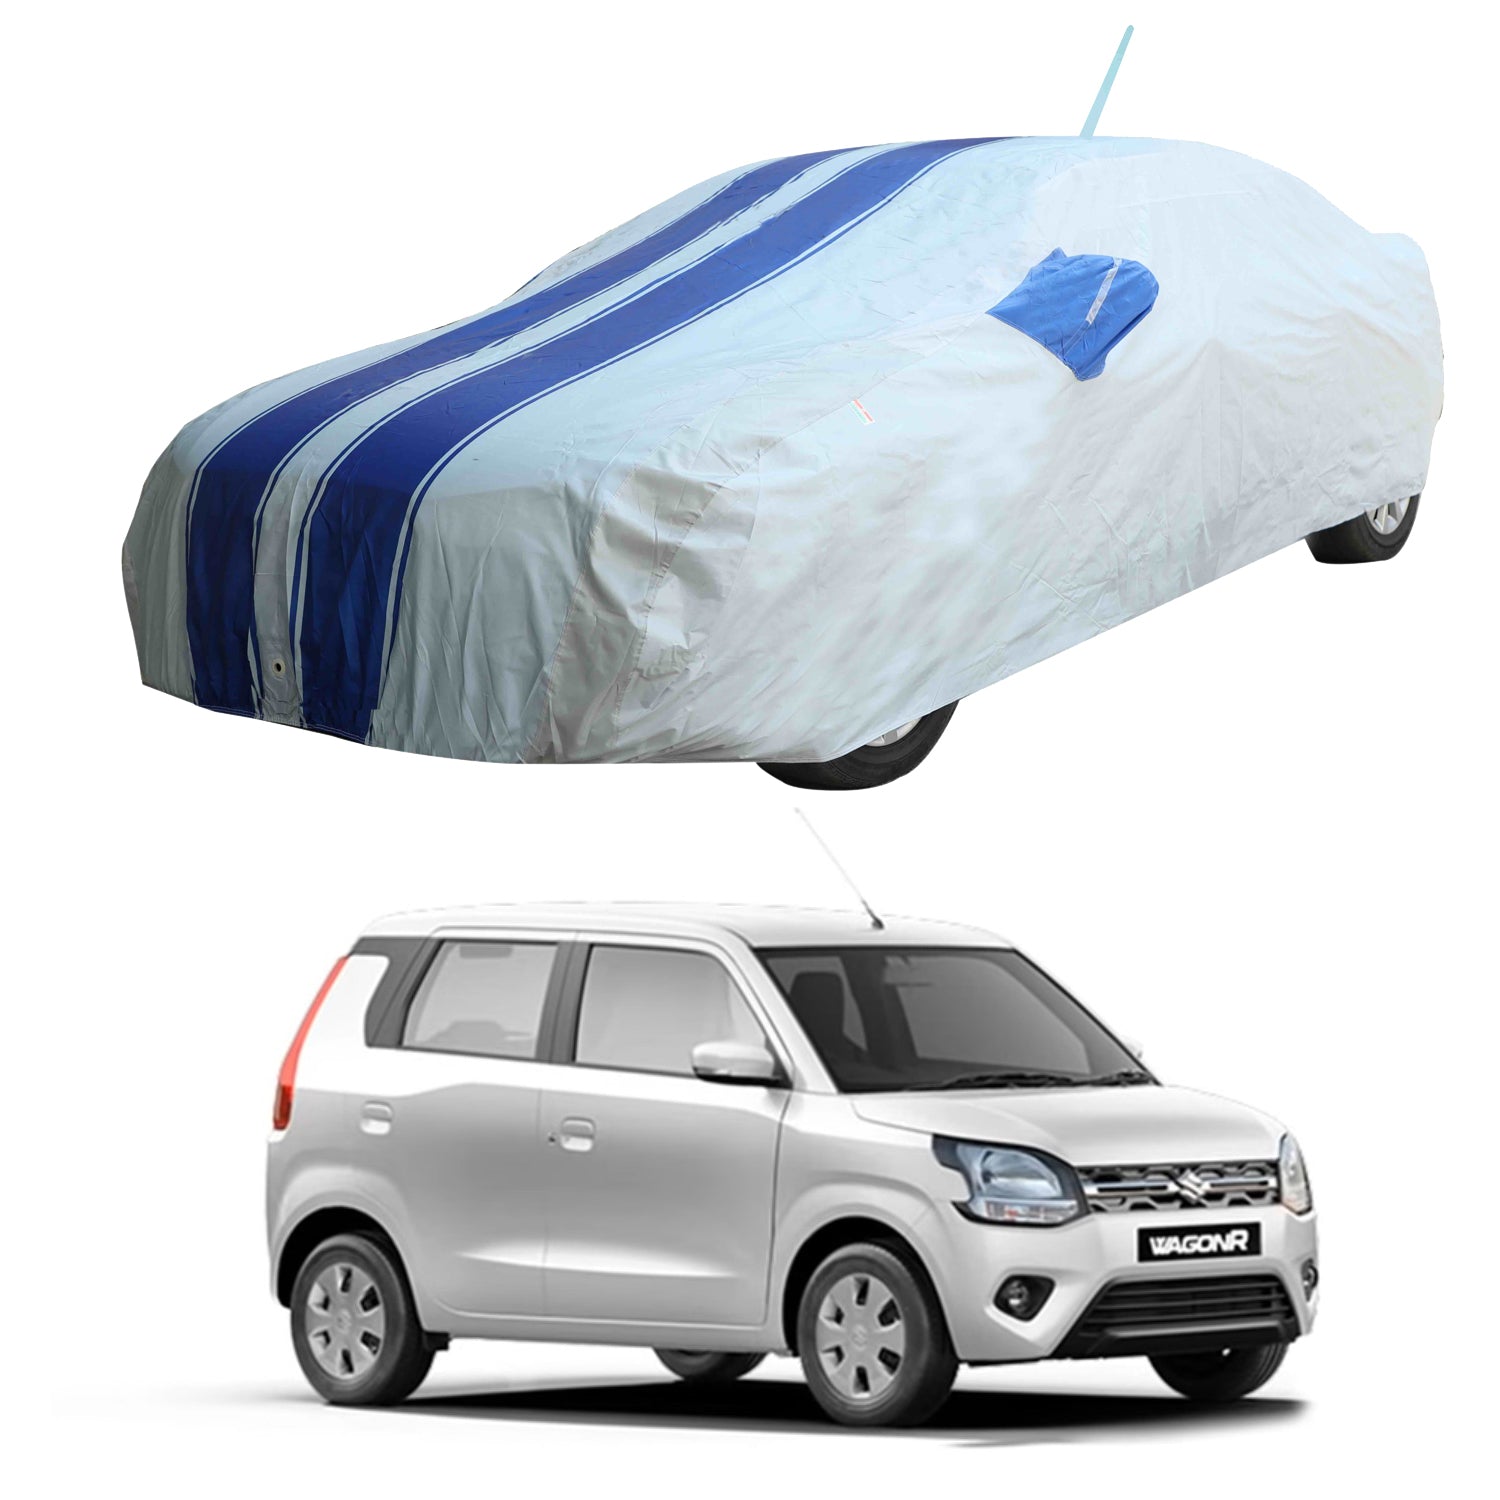 Oshotto 100% Dust Proof, Water Resistant Grey Car Body Cover with